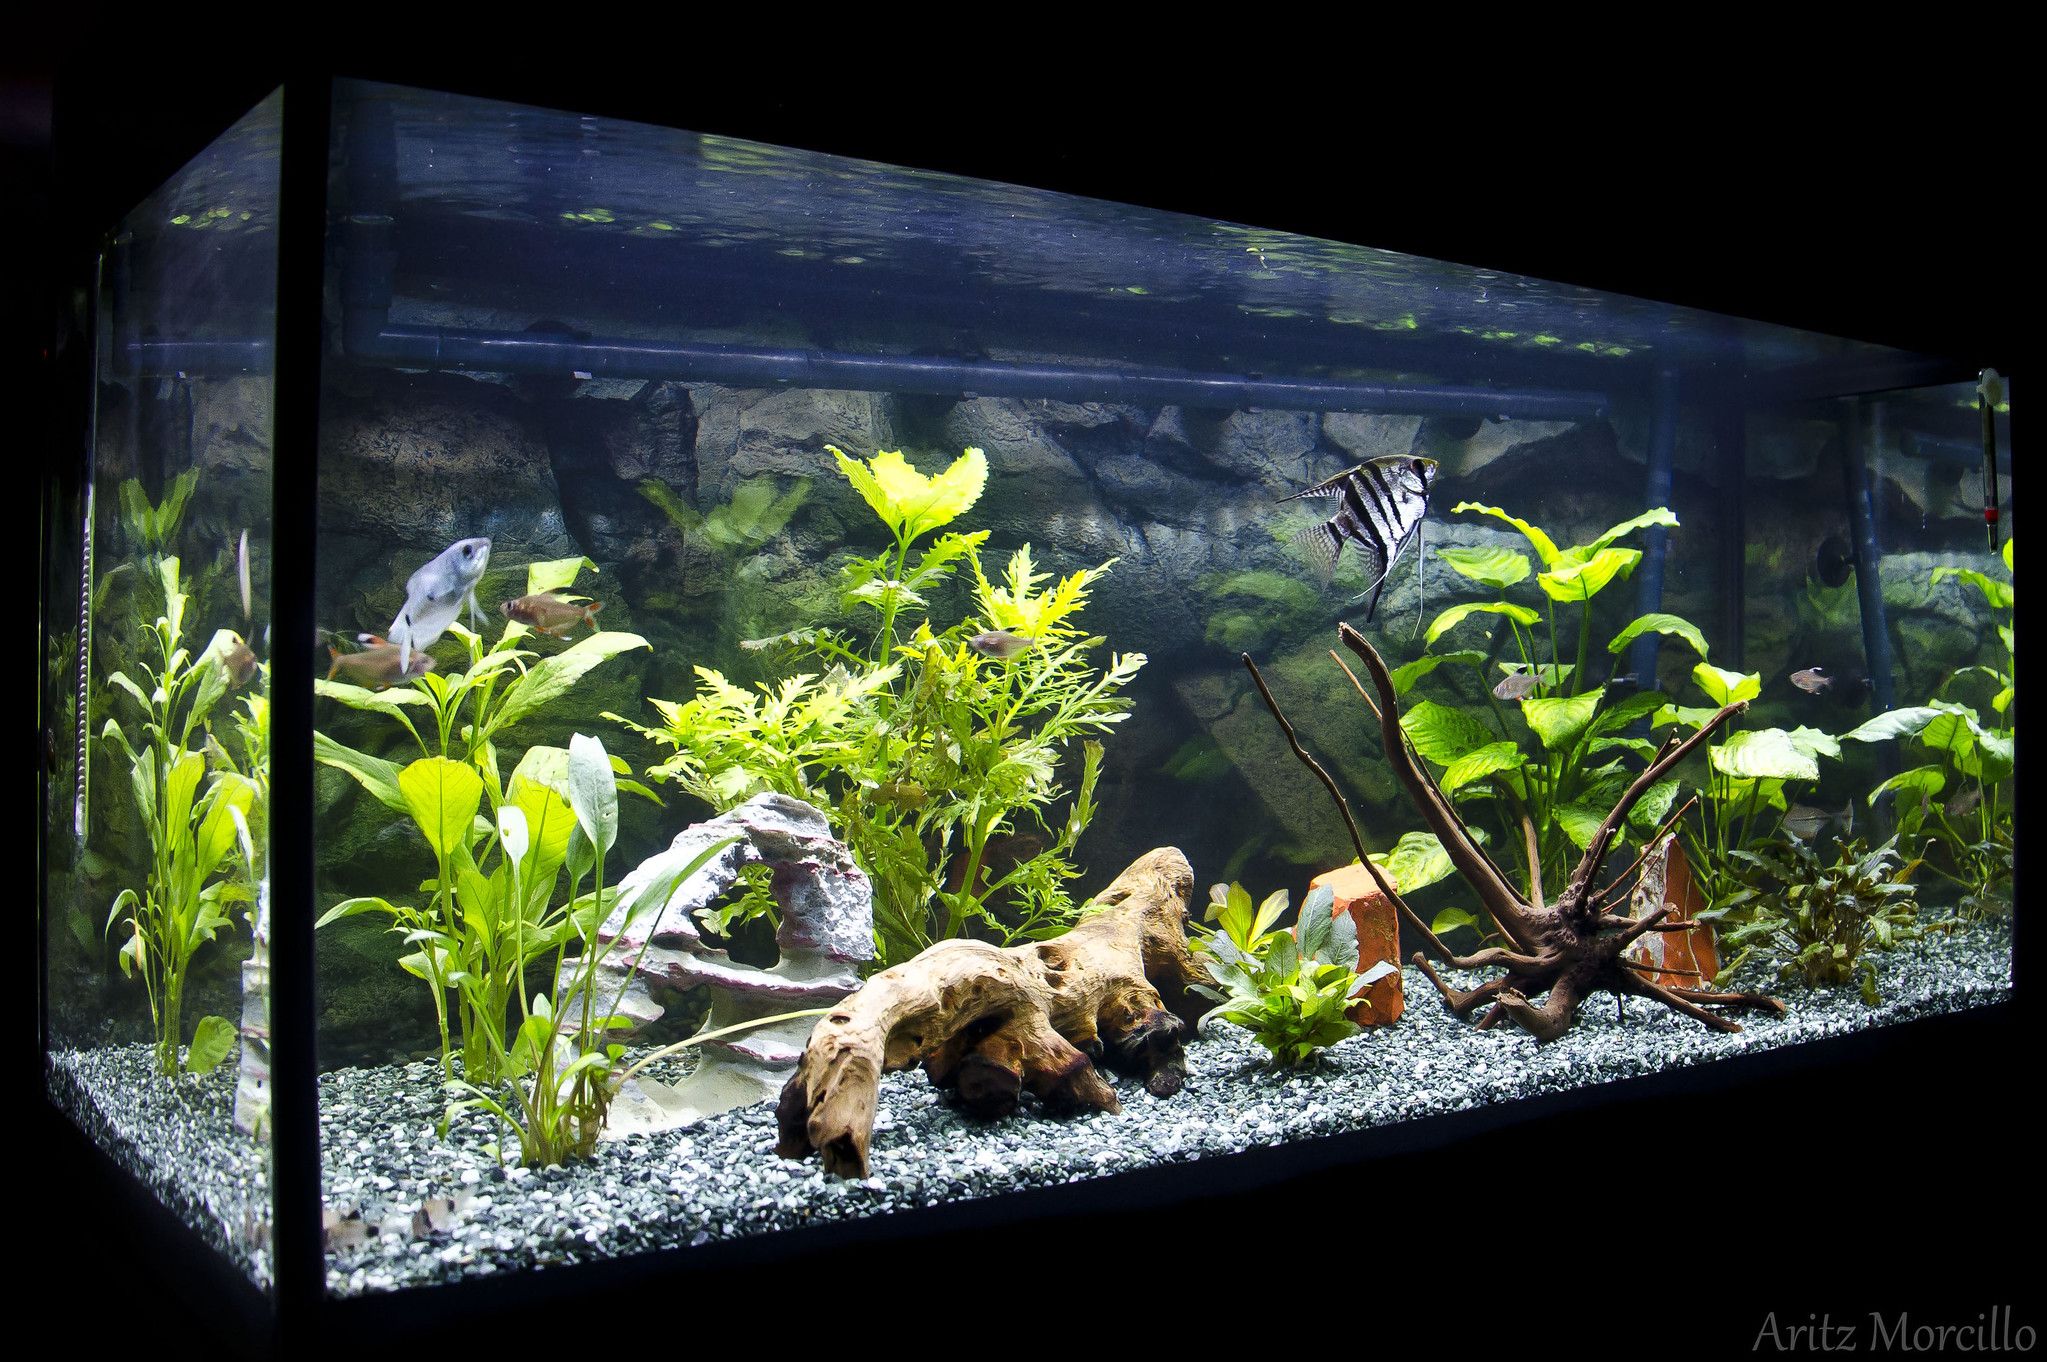 Looking to Clean Your Fish Tank Easily. Here are 10 Ways to Keep Your Aquarium Sparkling